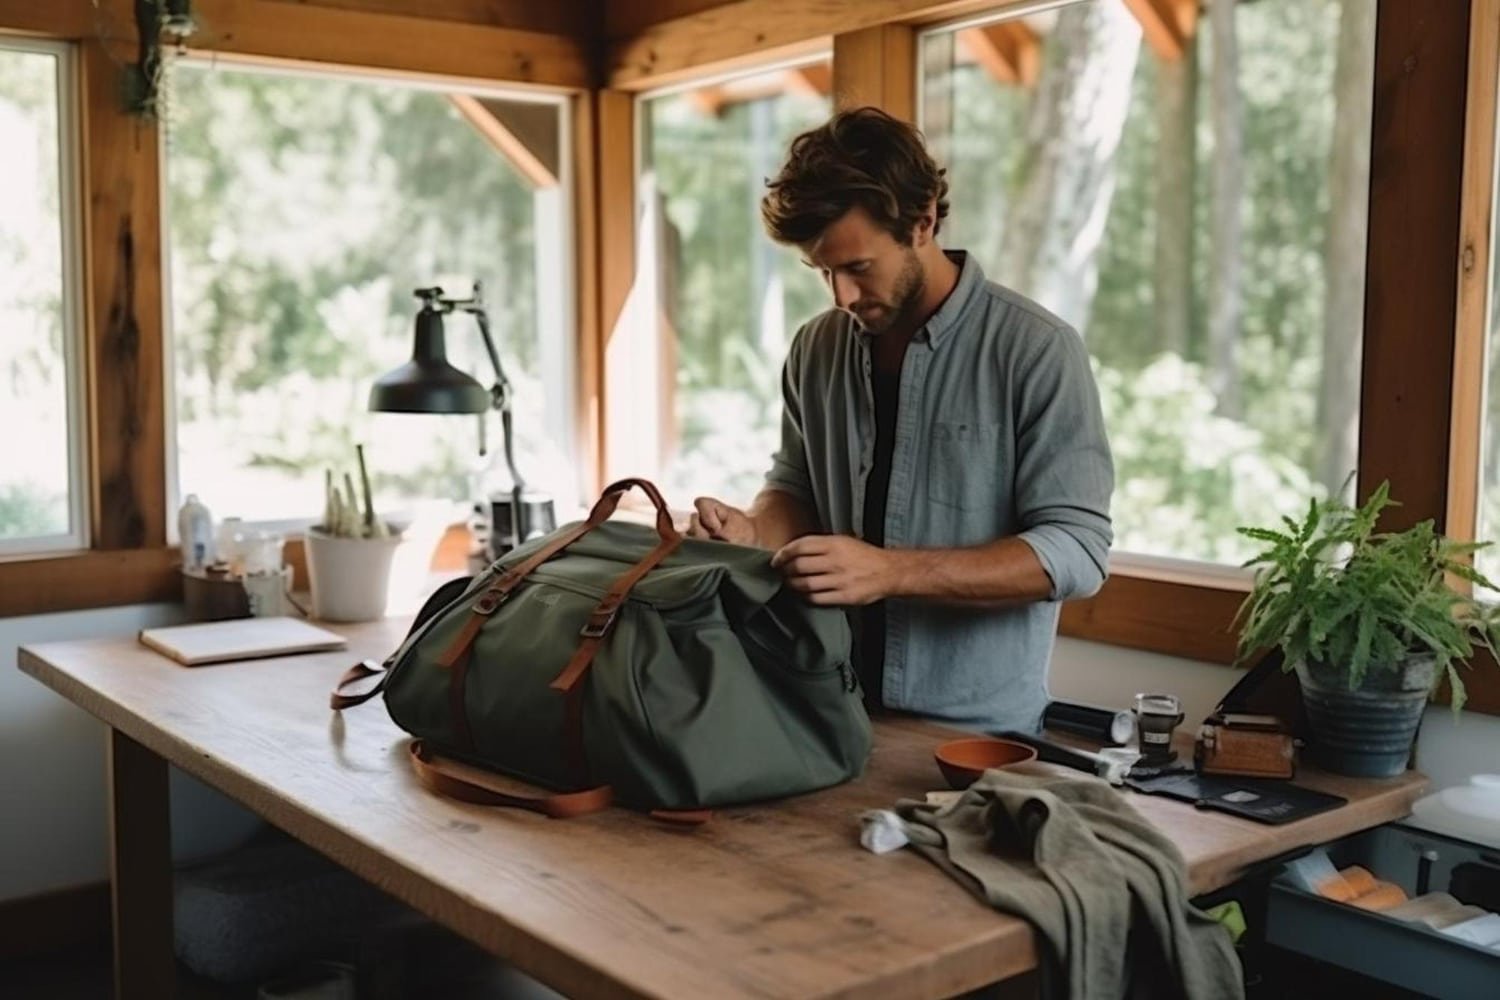 Stylish Outdoor Gear by Output